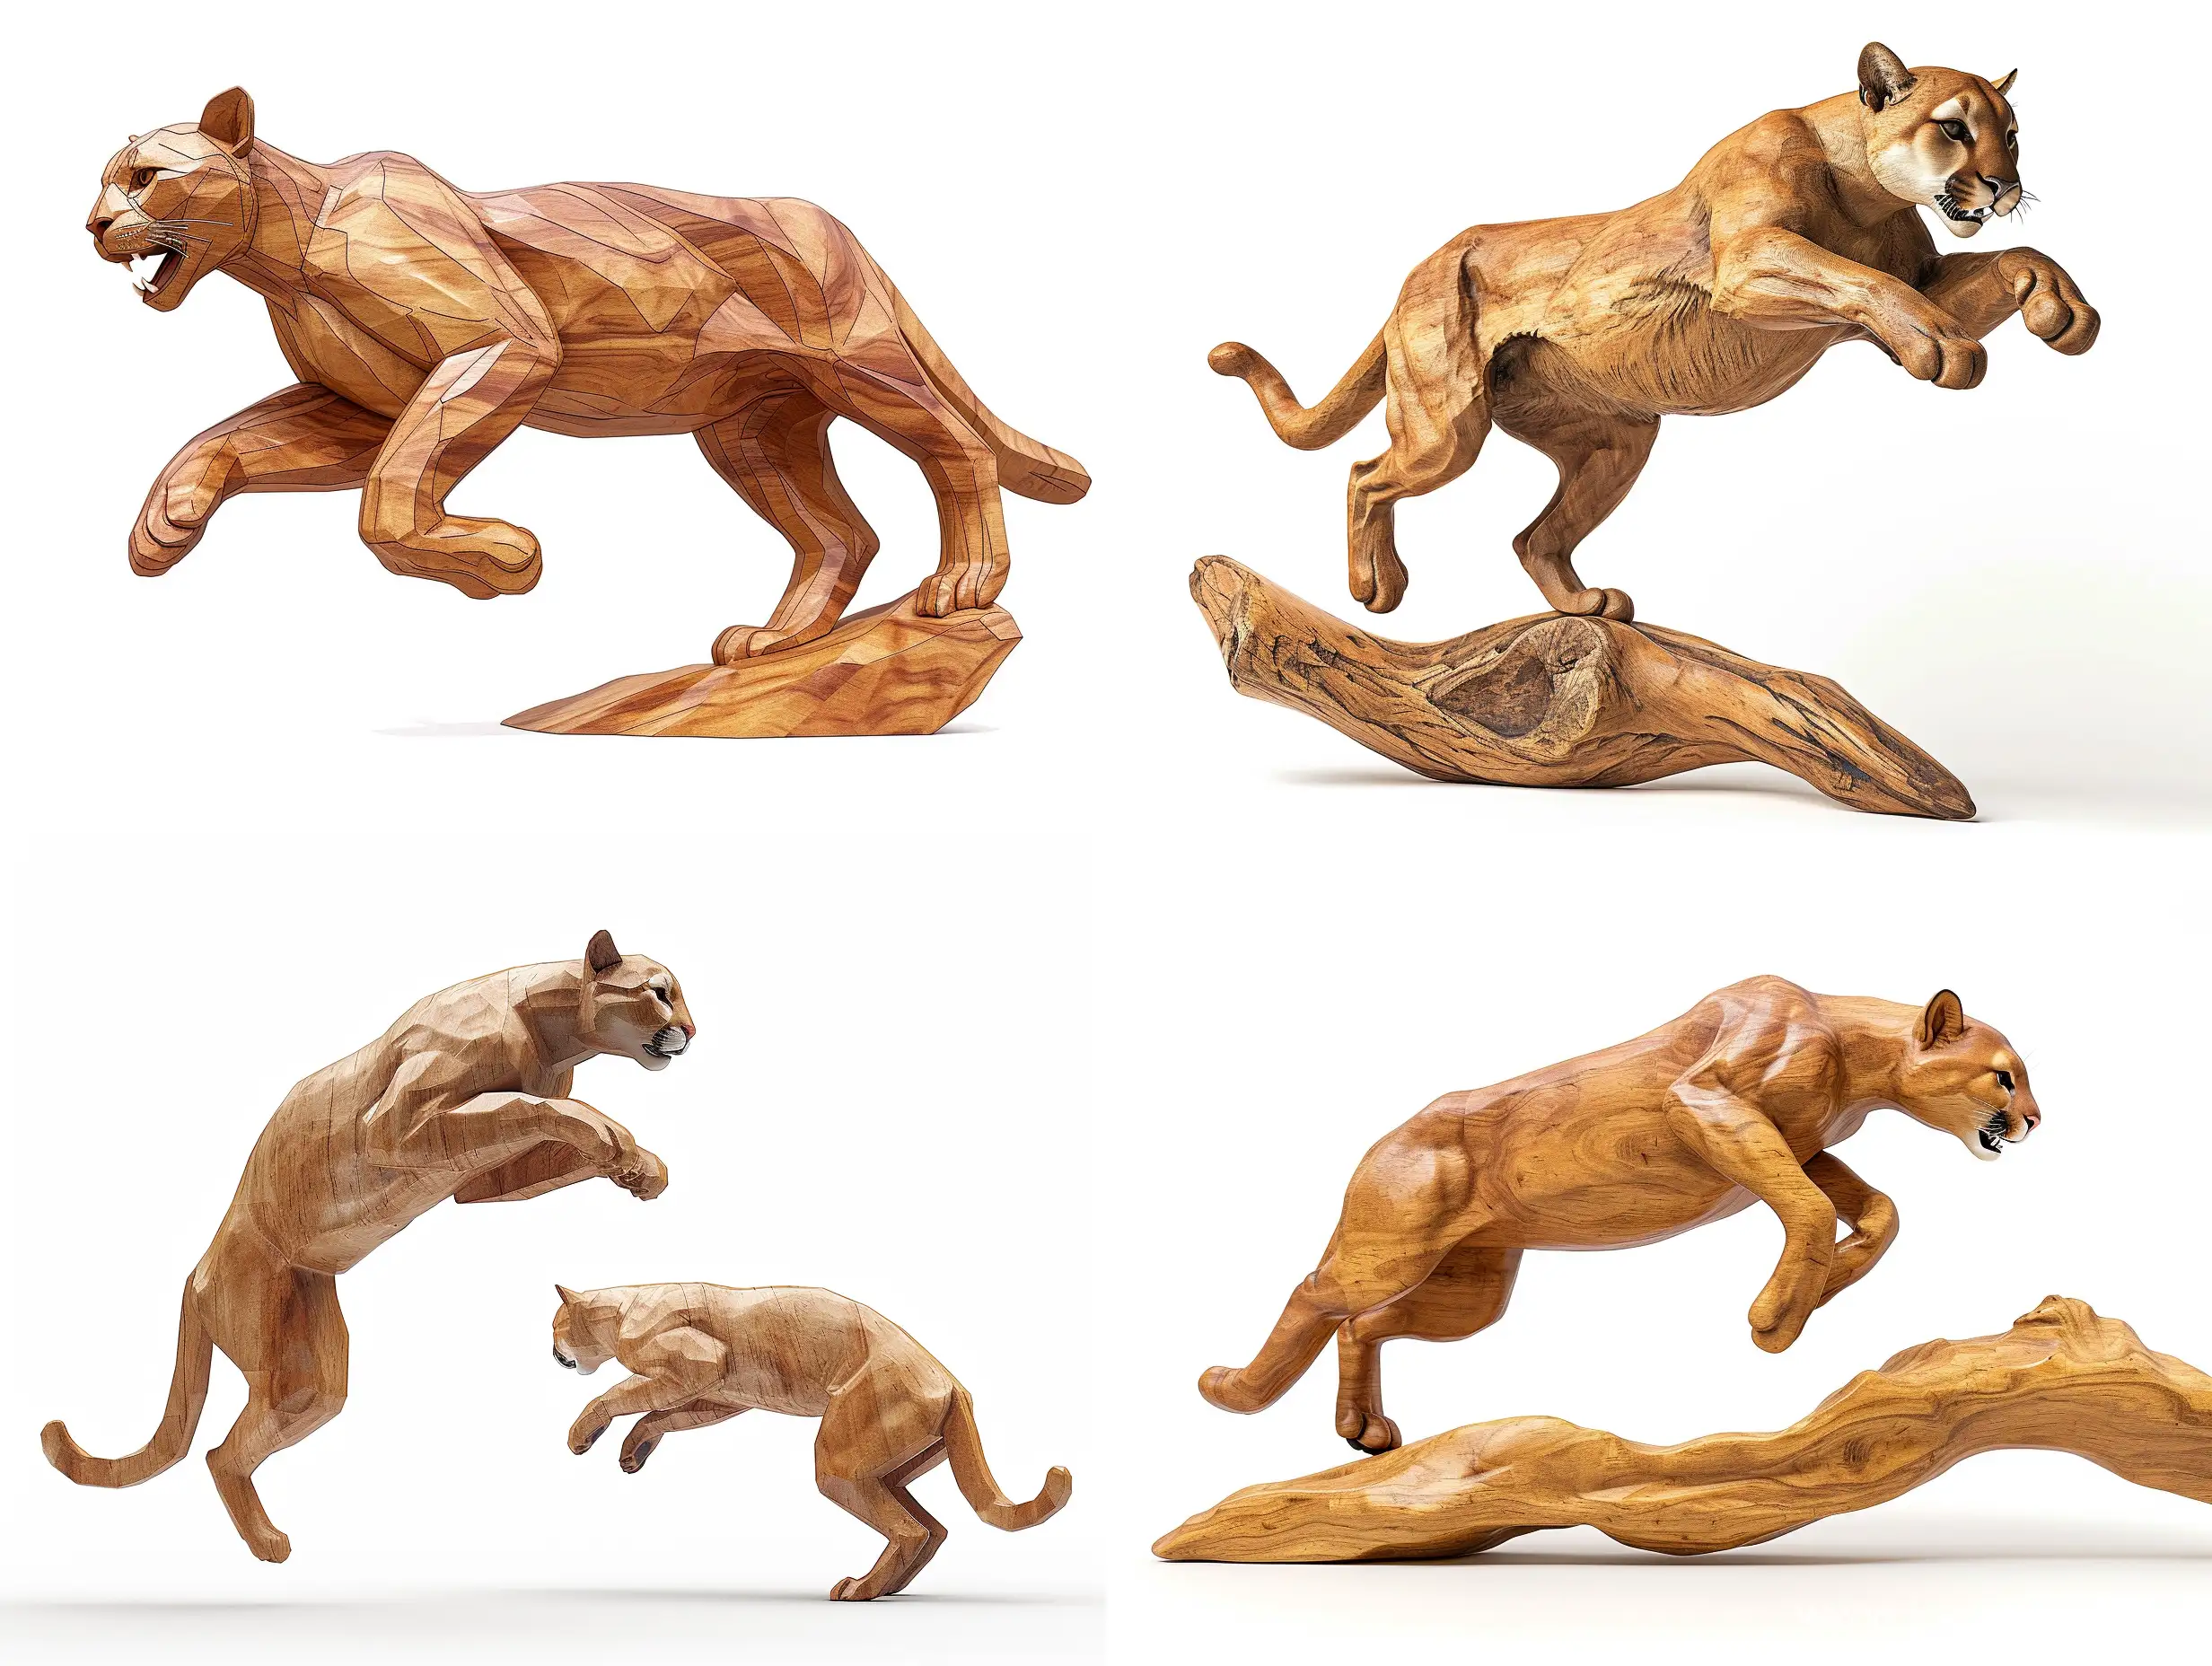 Realistic-Wooden-Sculpture-of-Puma-Concolor-in-Dynamic-Poses